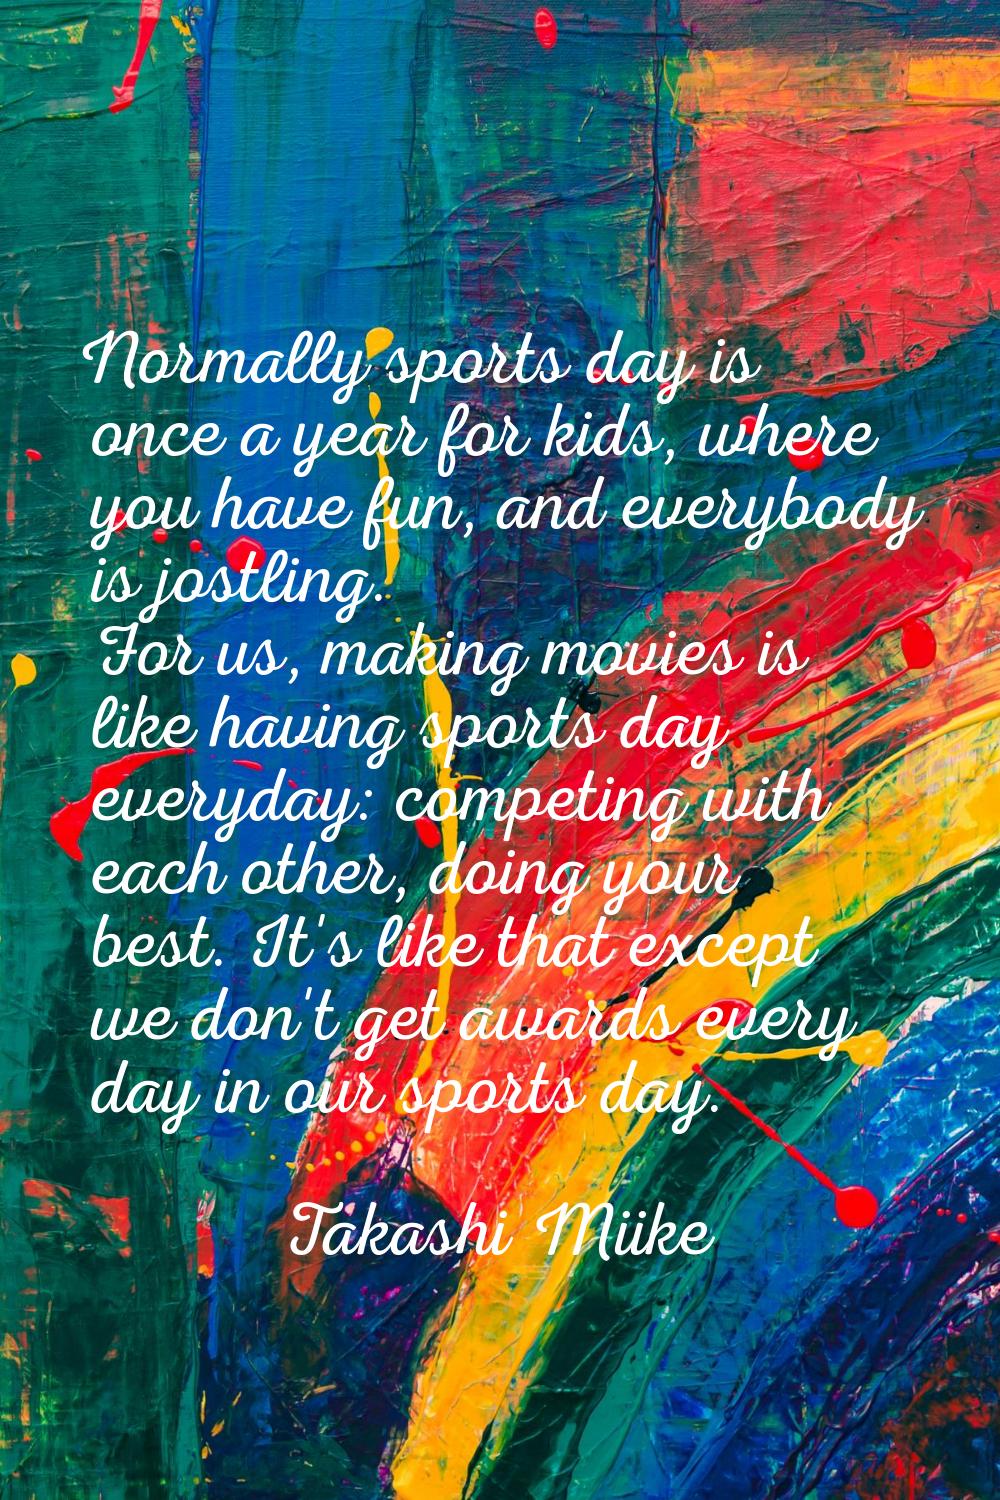 Normally sports day is once a year for kids, where you have fun, and everybody is jostling. For us,